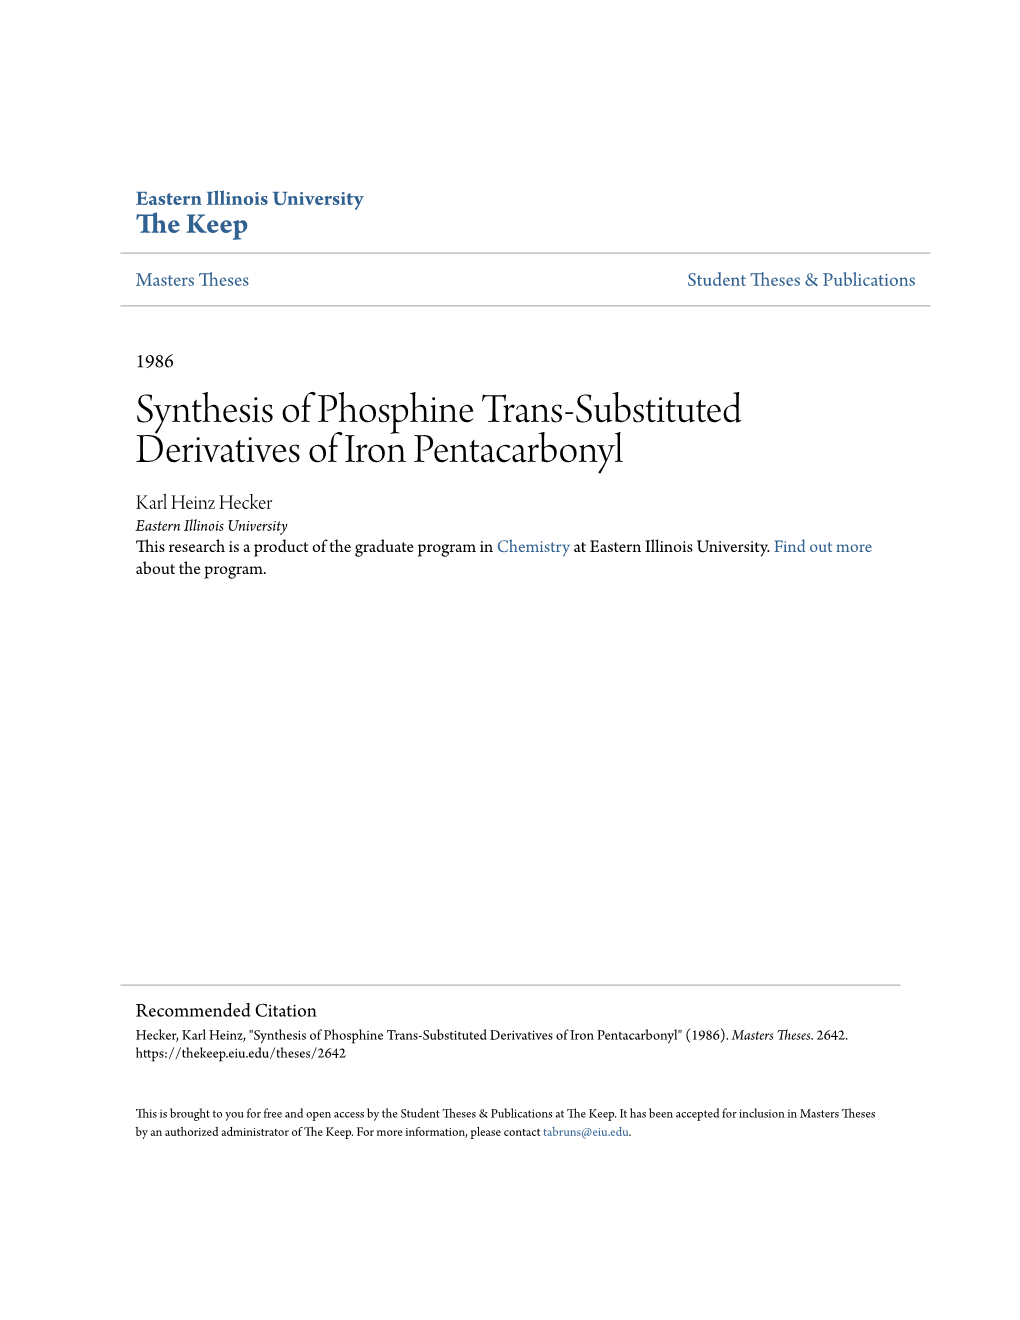 Synthesis of Phosphine Trans-Substituted Derivatives Of